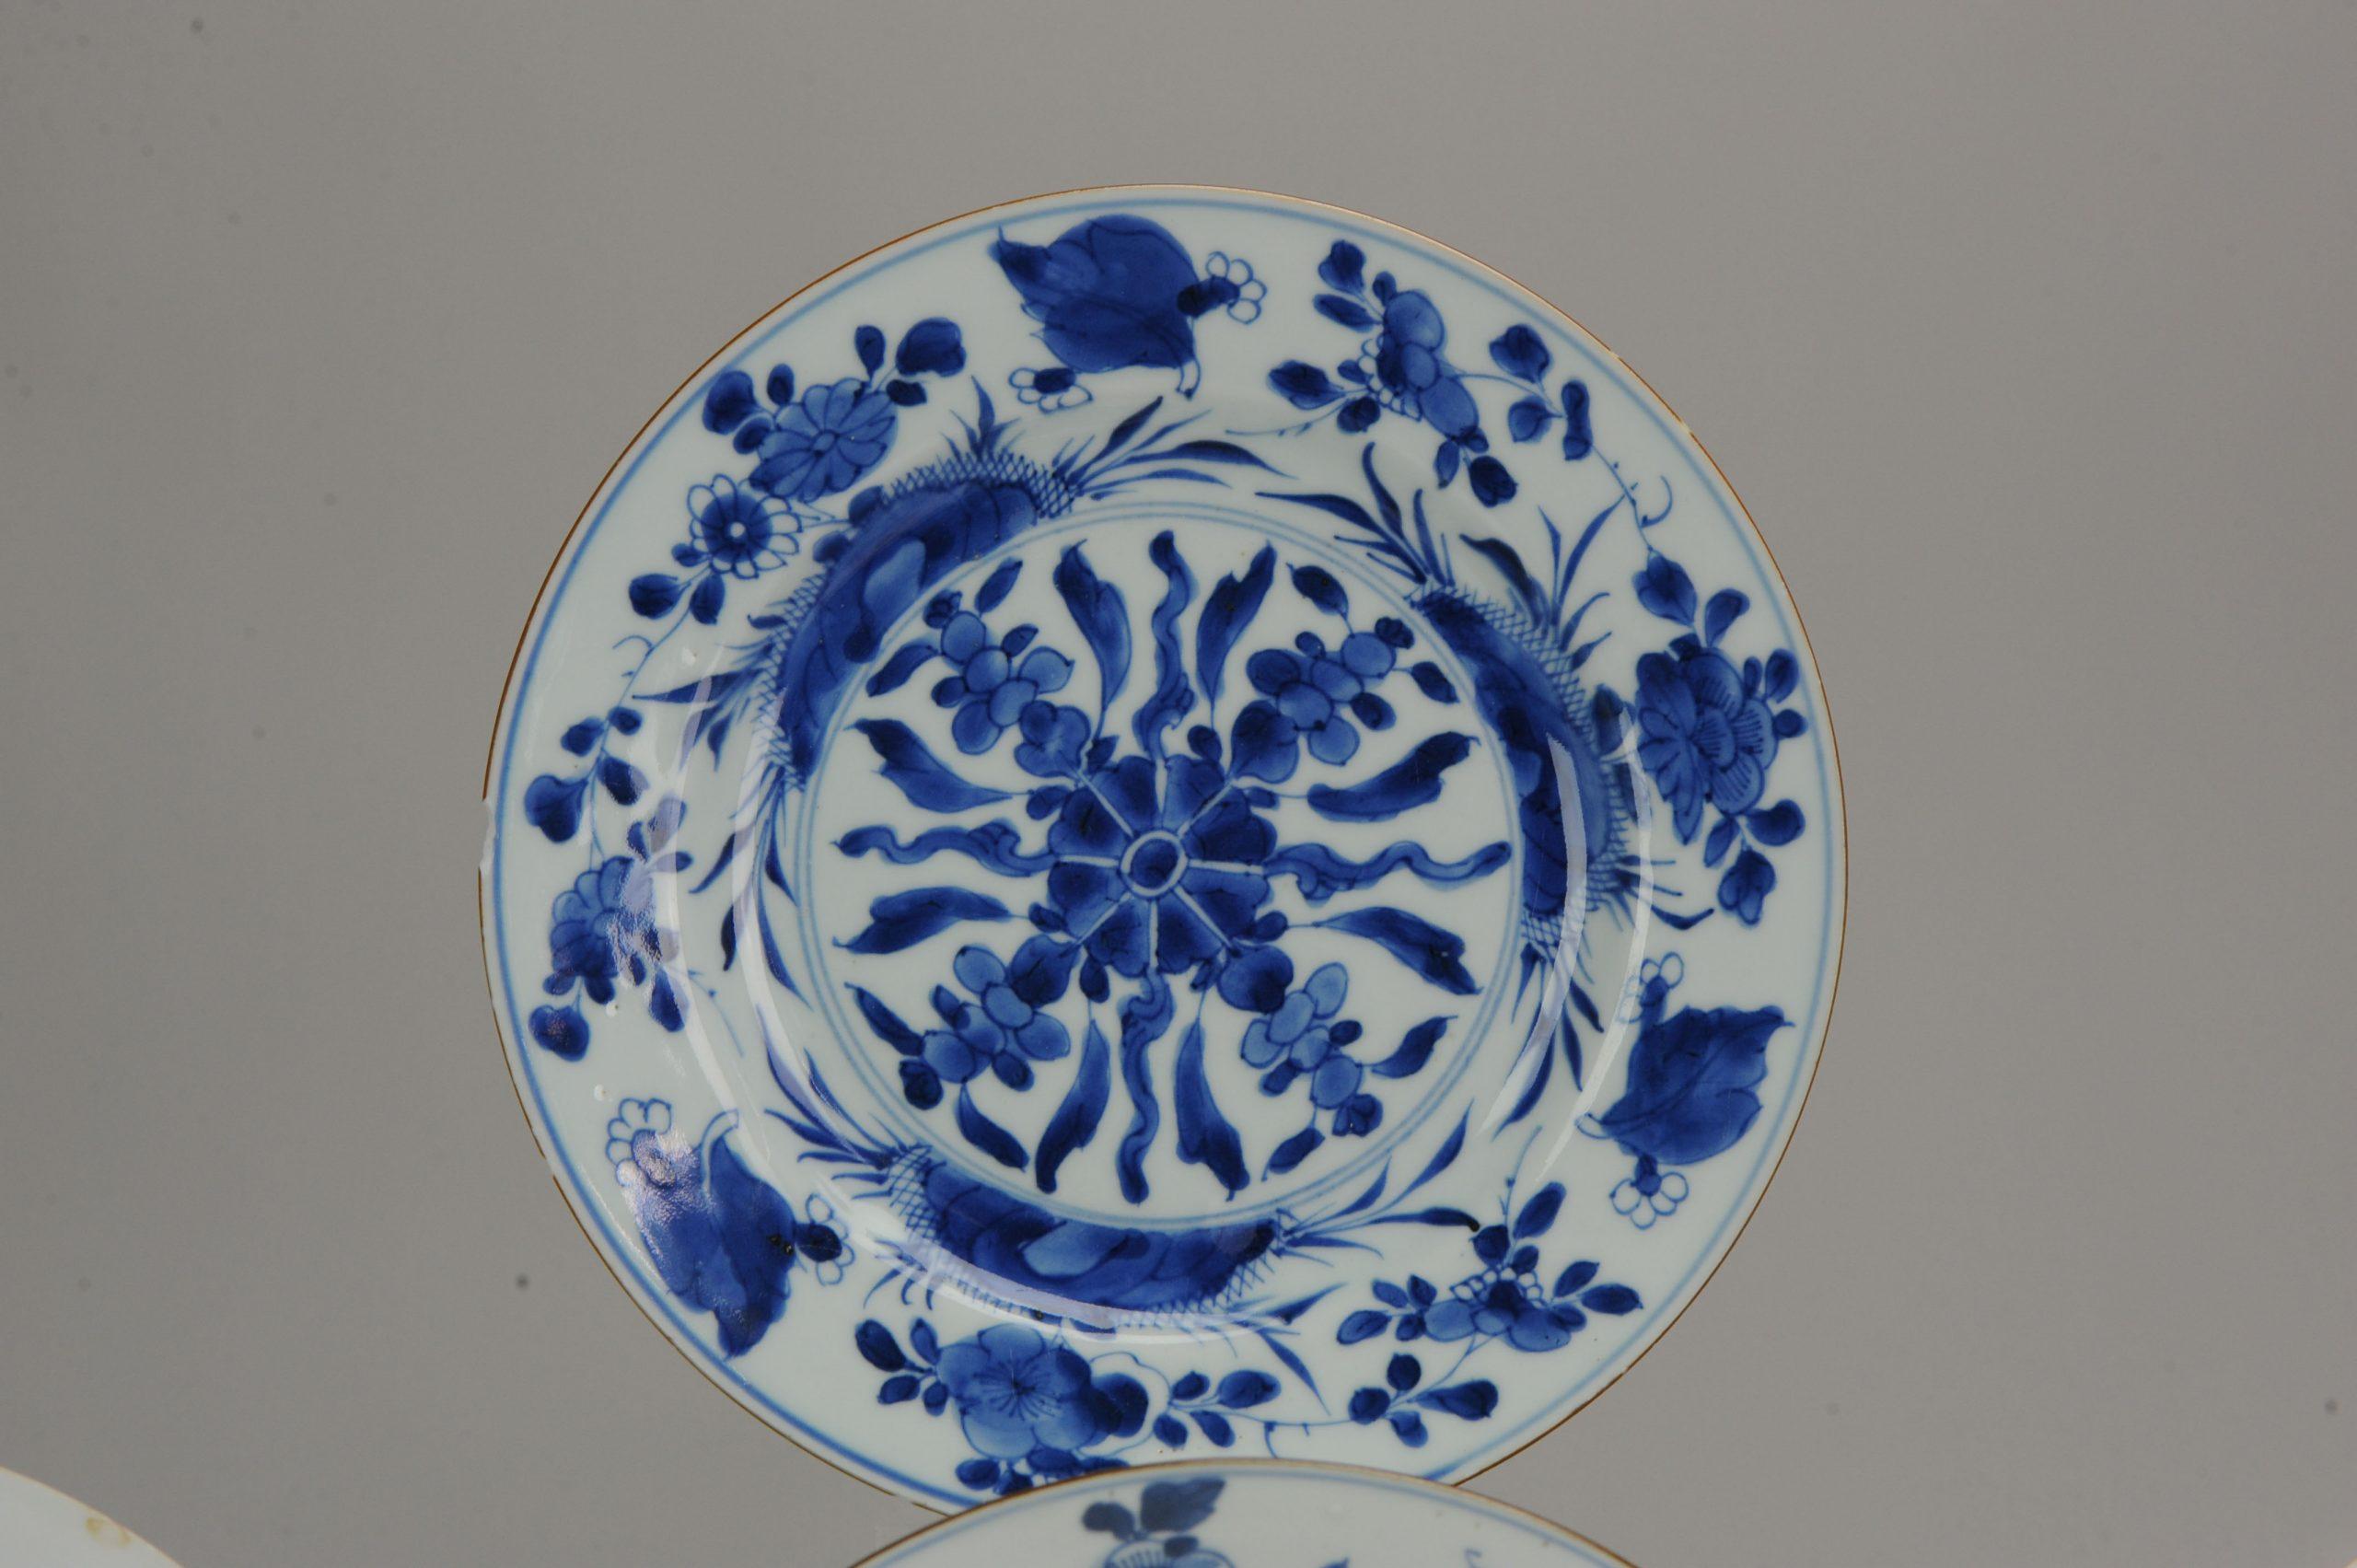 Antique Chinese Porcelain 18th Century Kangxi Period Blue White Dinner Plat In Good Condition For Sale In Amsterdam, Noord Holland